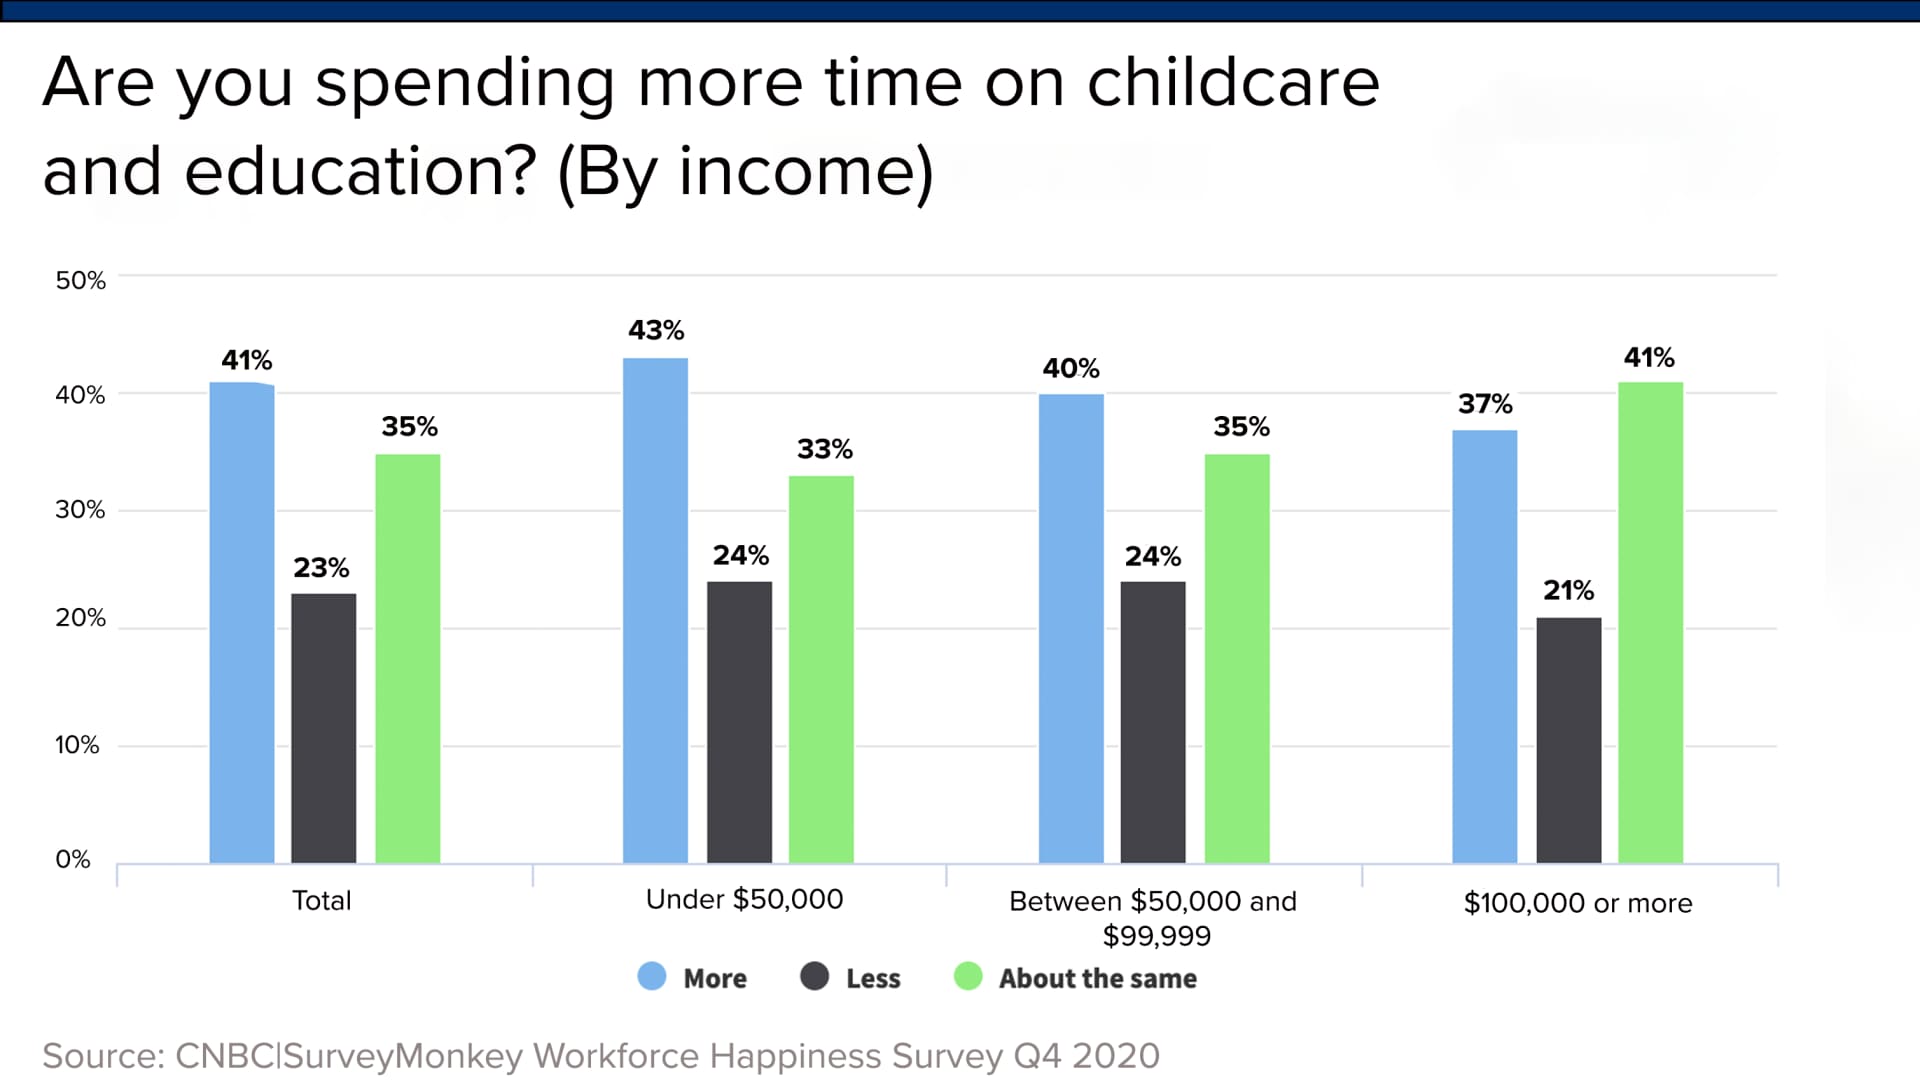 42 million Americans have not had the option of telecommuting during the pandemic, with this more common at lower income levels, and yet these working parents are the most likely to be say they are spending more time on childcare and education, according to CNBC|SurveyMonkey data.